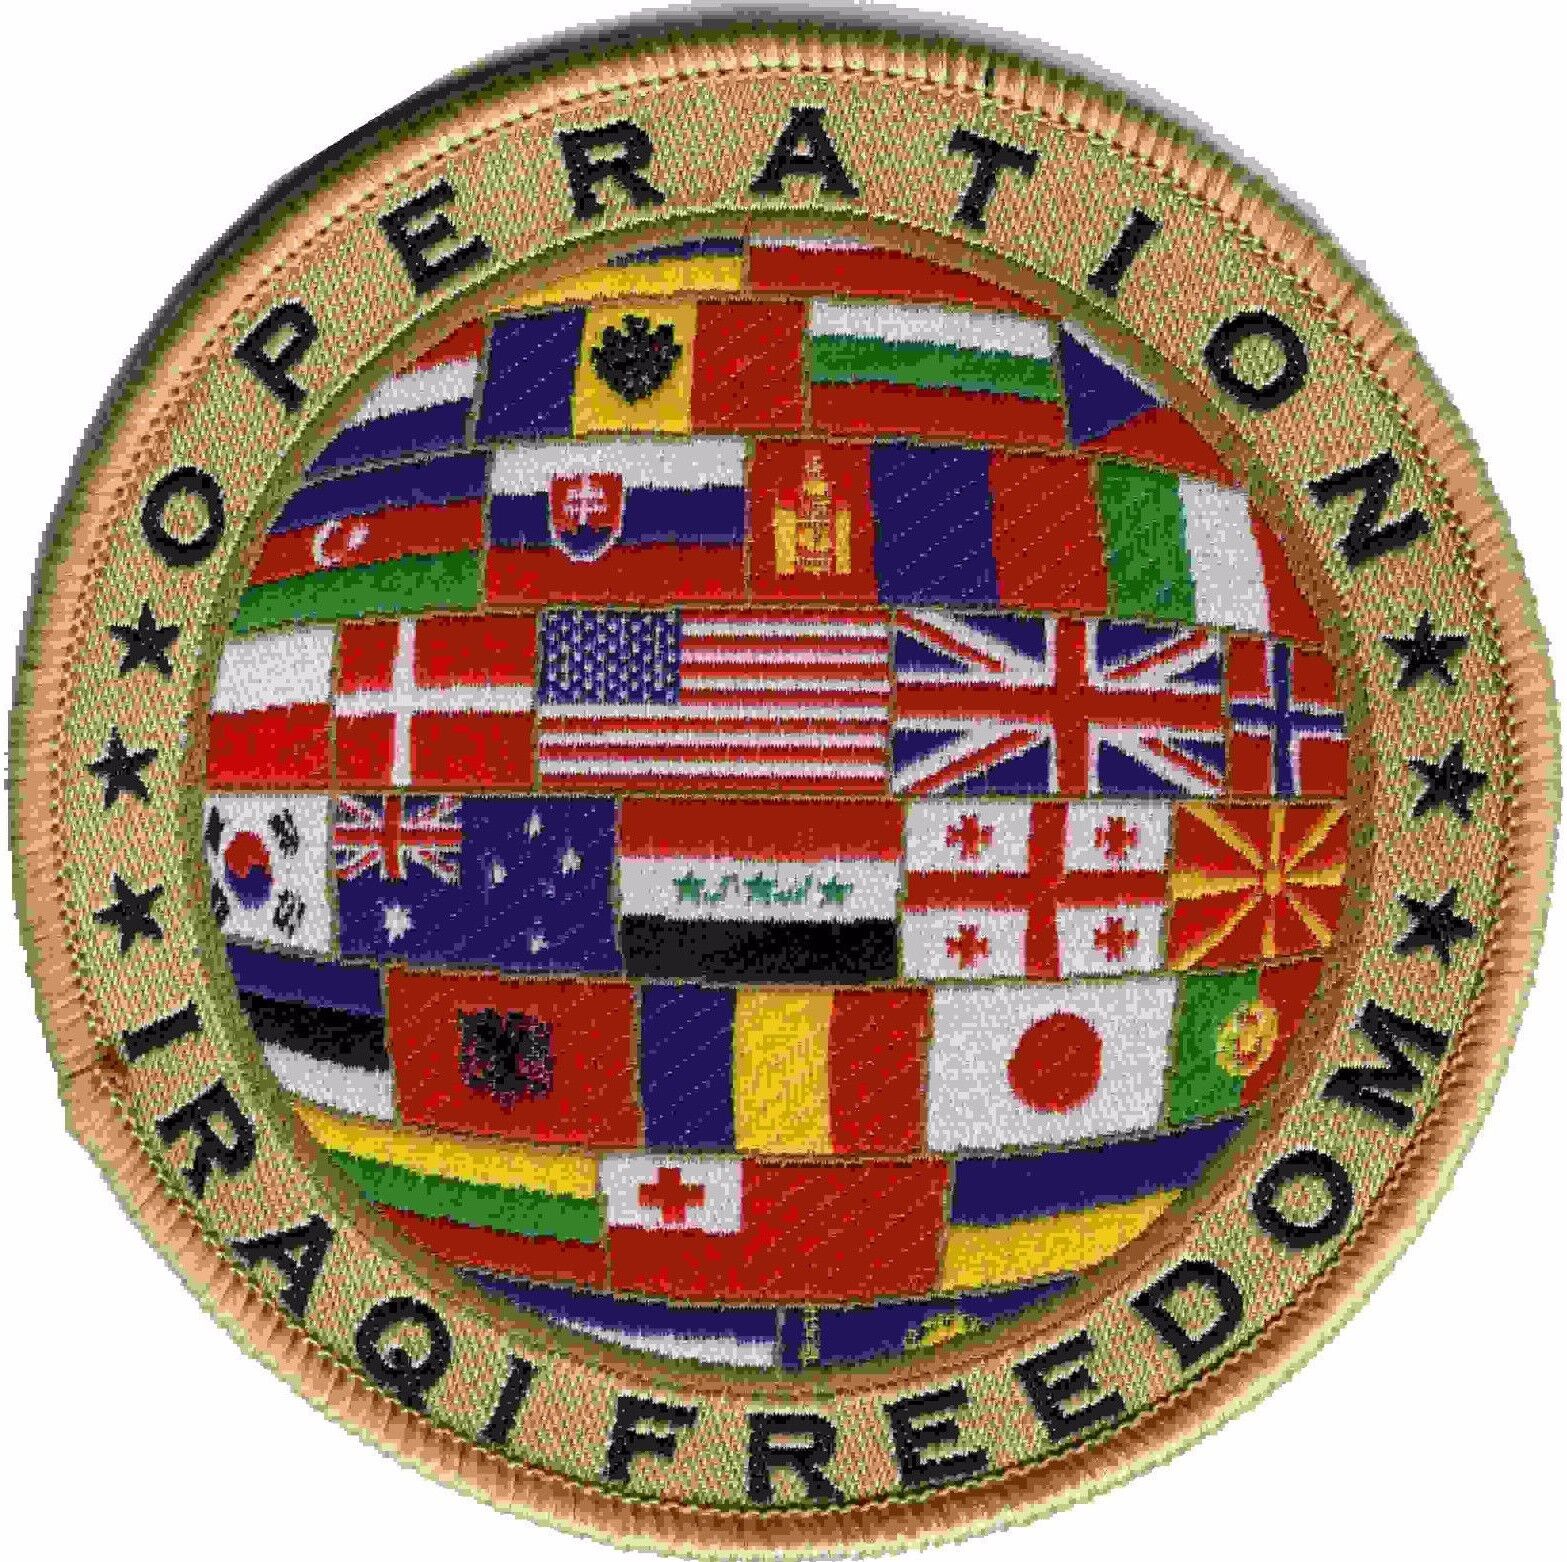 OIF OPERATION IRAQI FREEDOM COALITION FORCES FLAGS EMBROIDERED PATCH